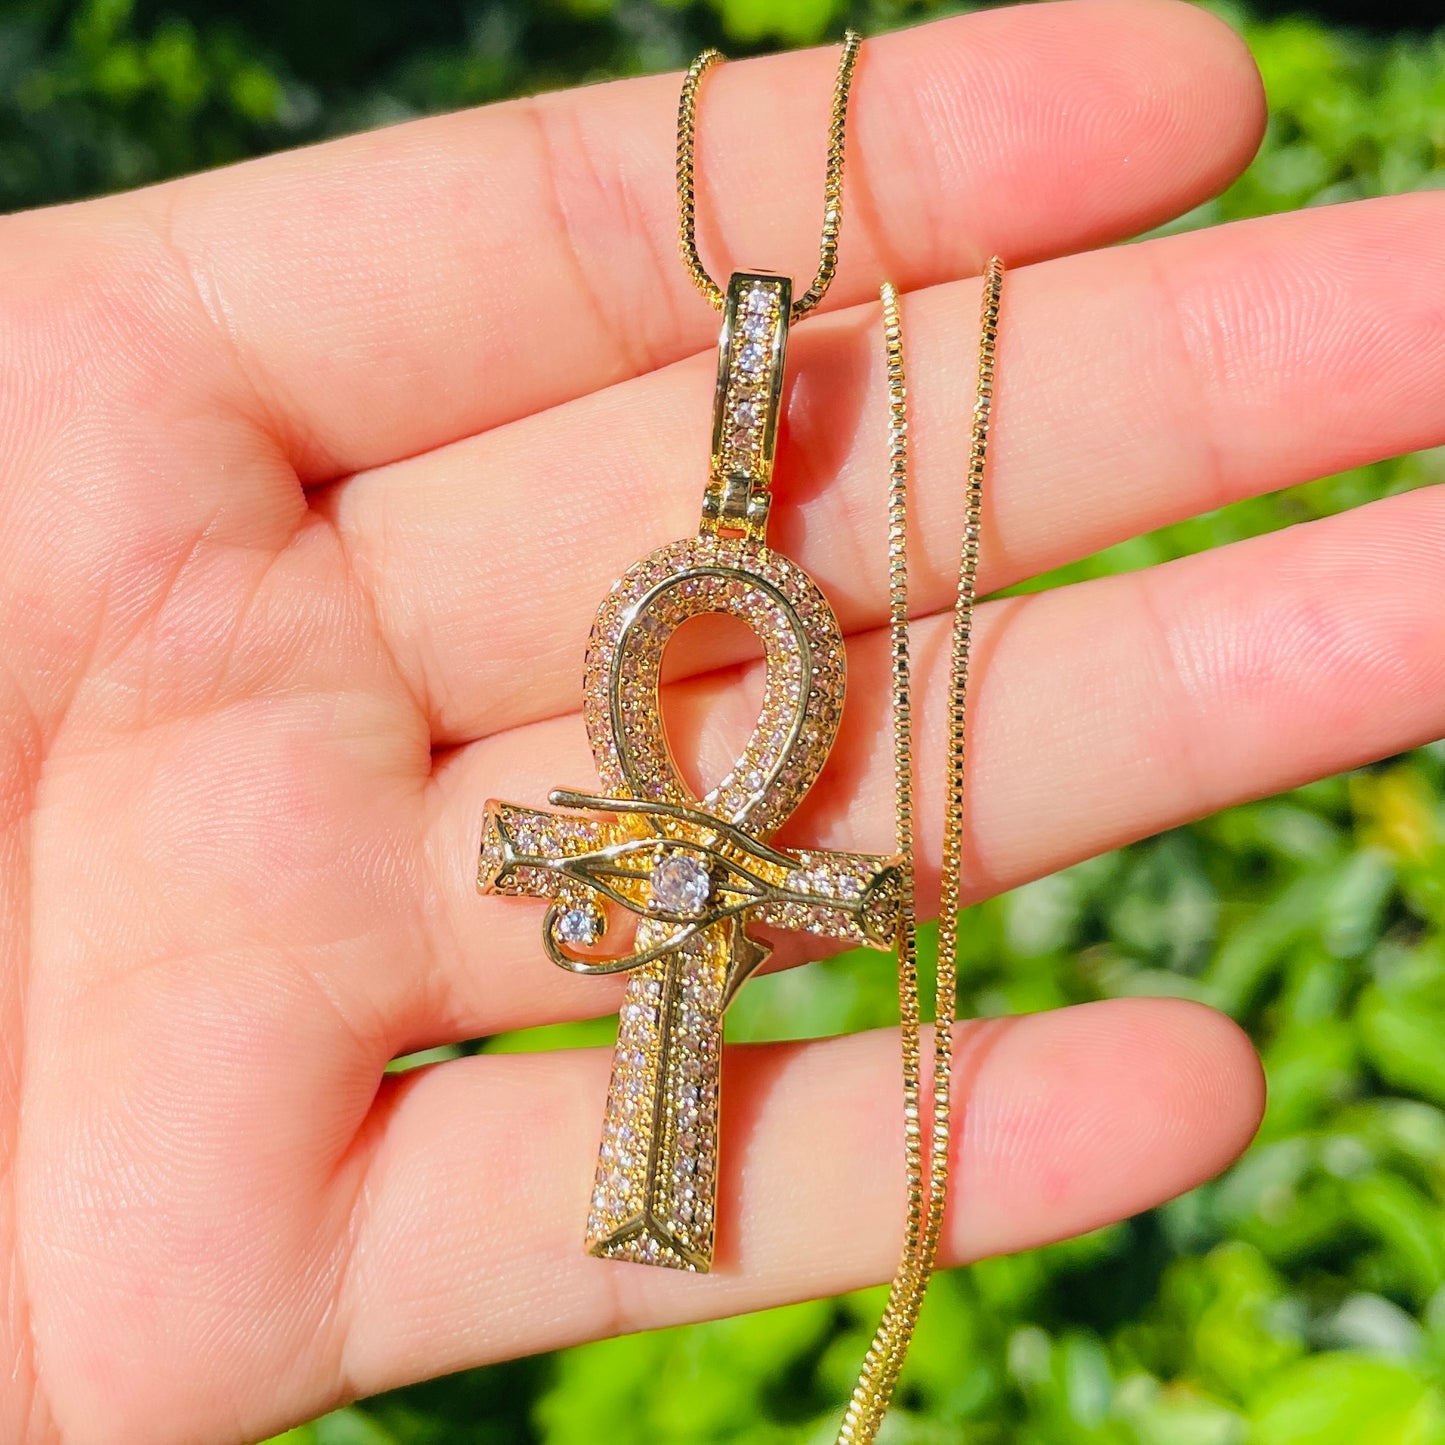 5pcs/lot 18/20 inch Box Chain CZ Pave Egypt Eyes of Horus ANKH Cross Necklace Necklaces Charms Beads Beyond